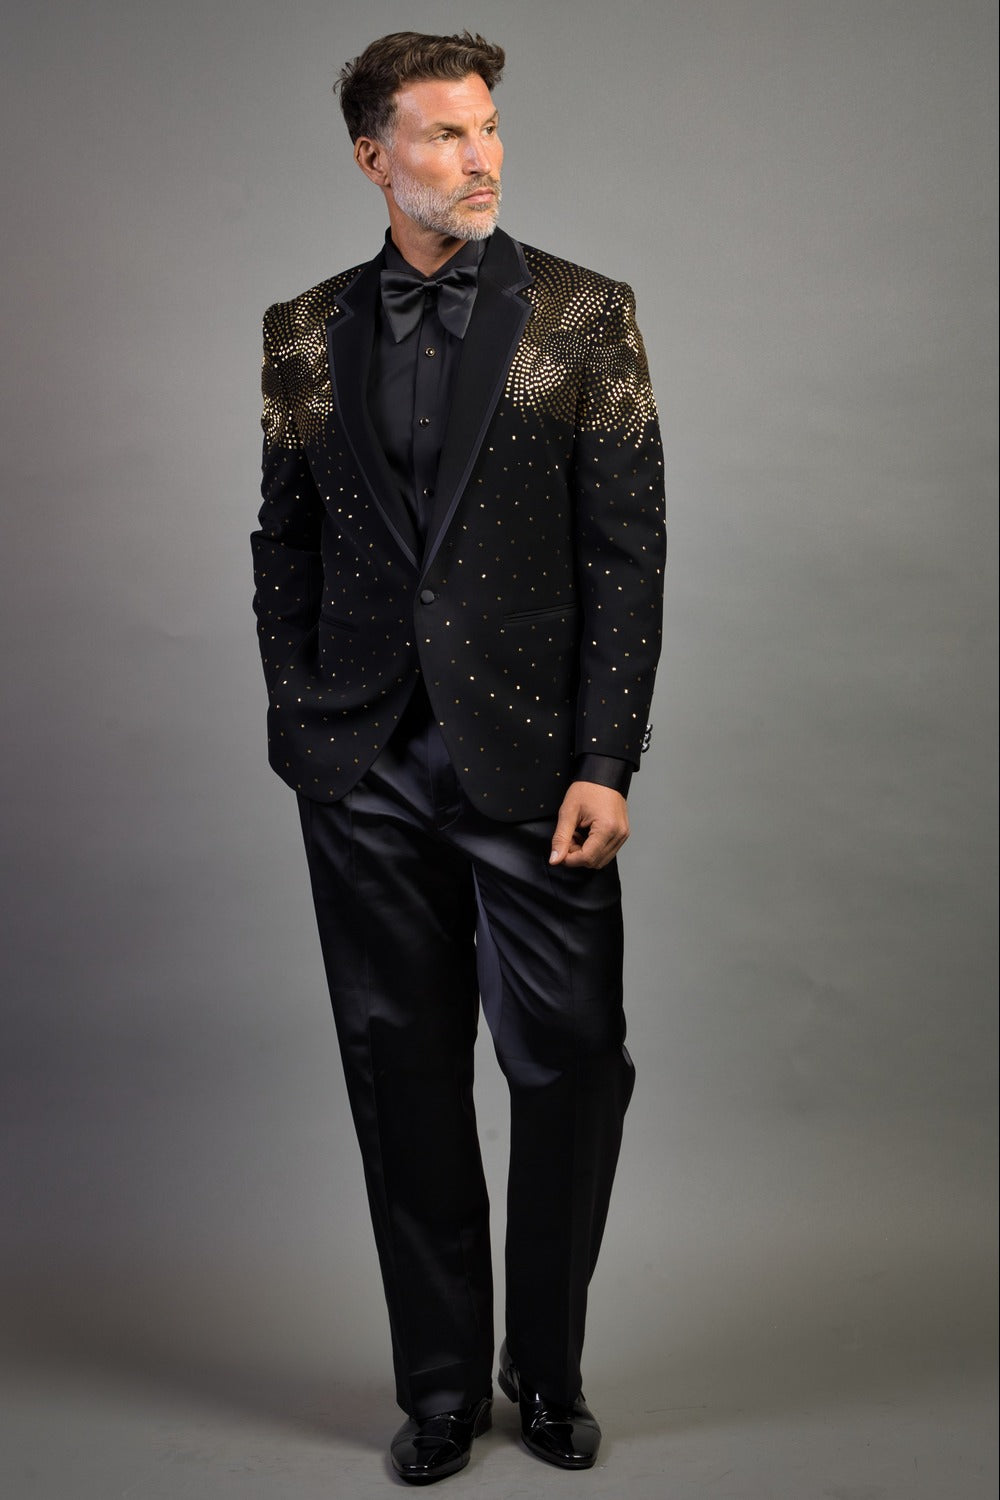 Heavy Crepe Tuxedo With Gold Embroidery